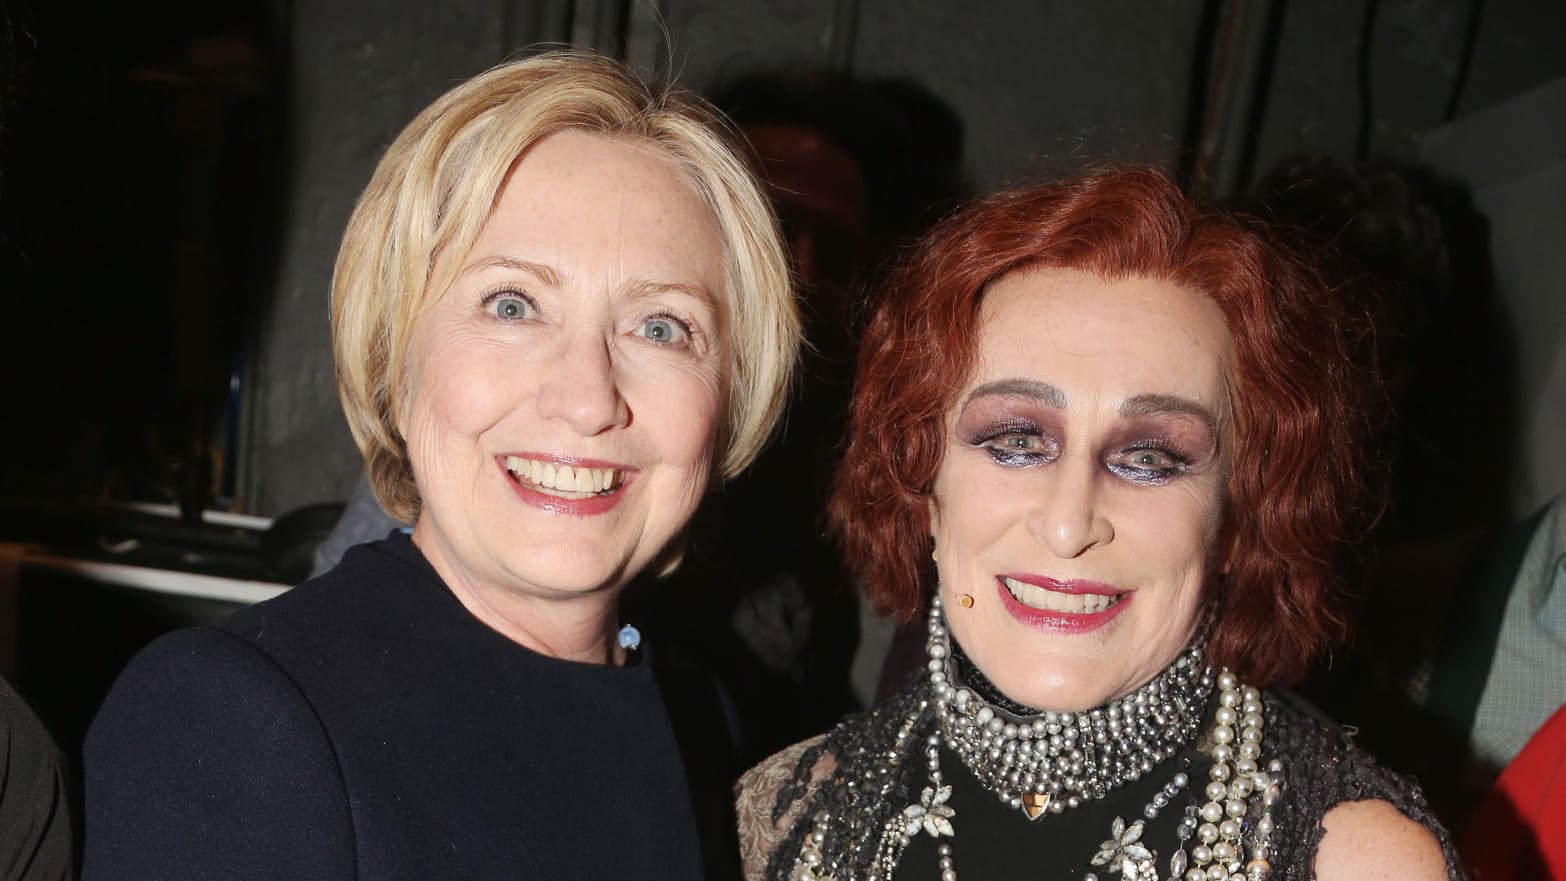 Hillary Clinton and Patti LuPone